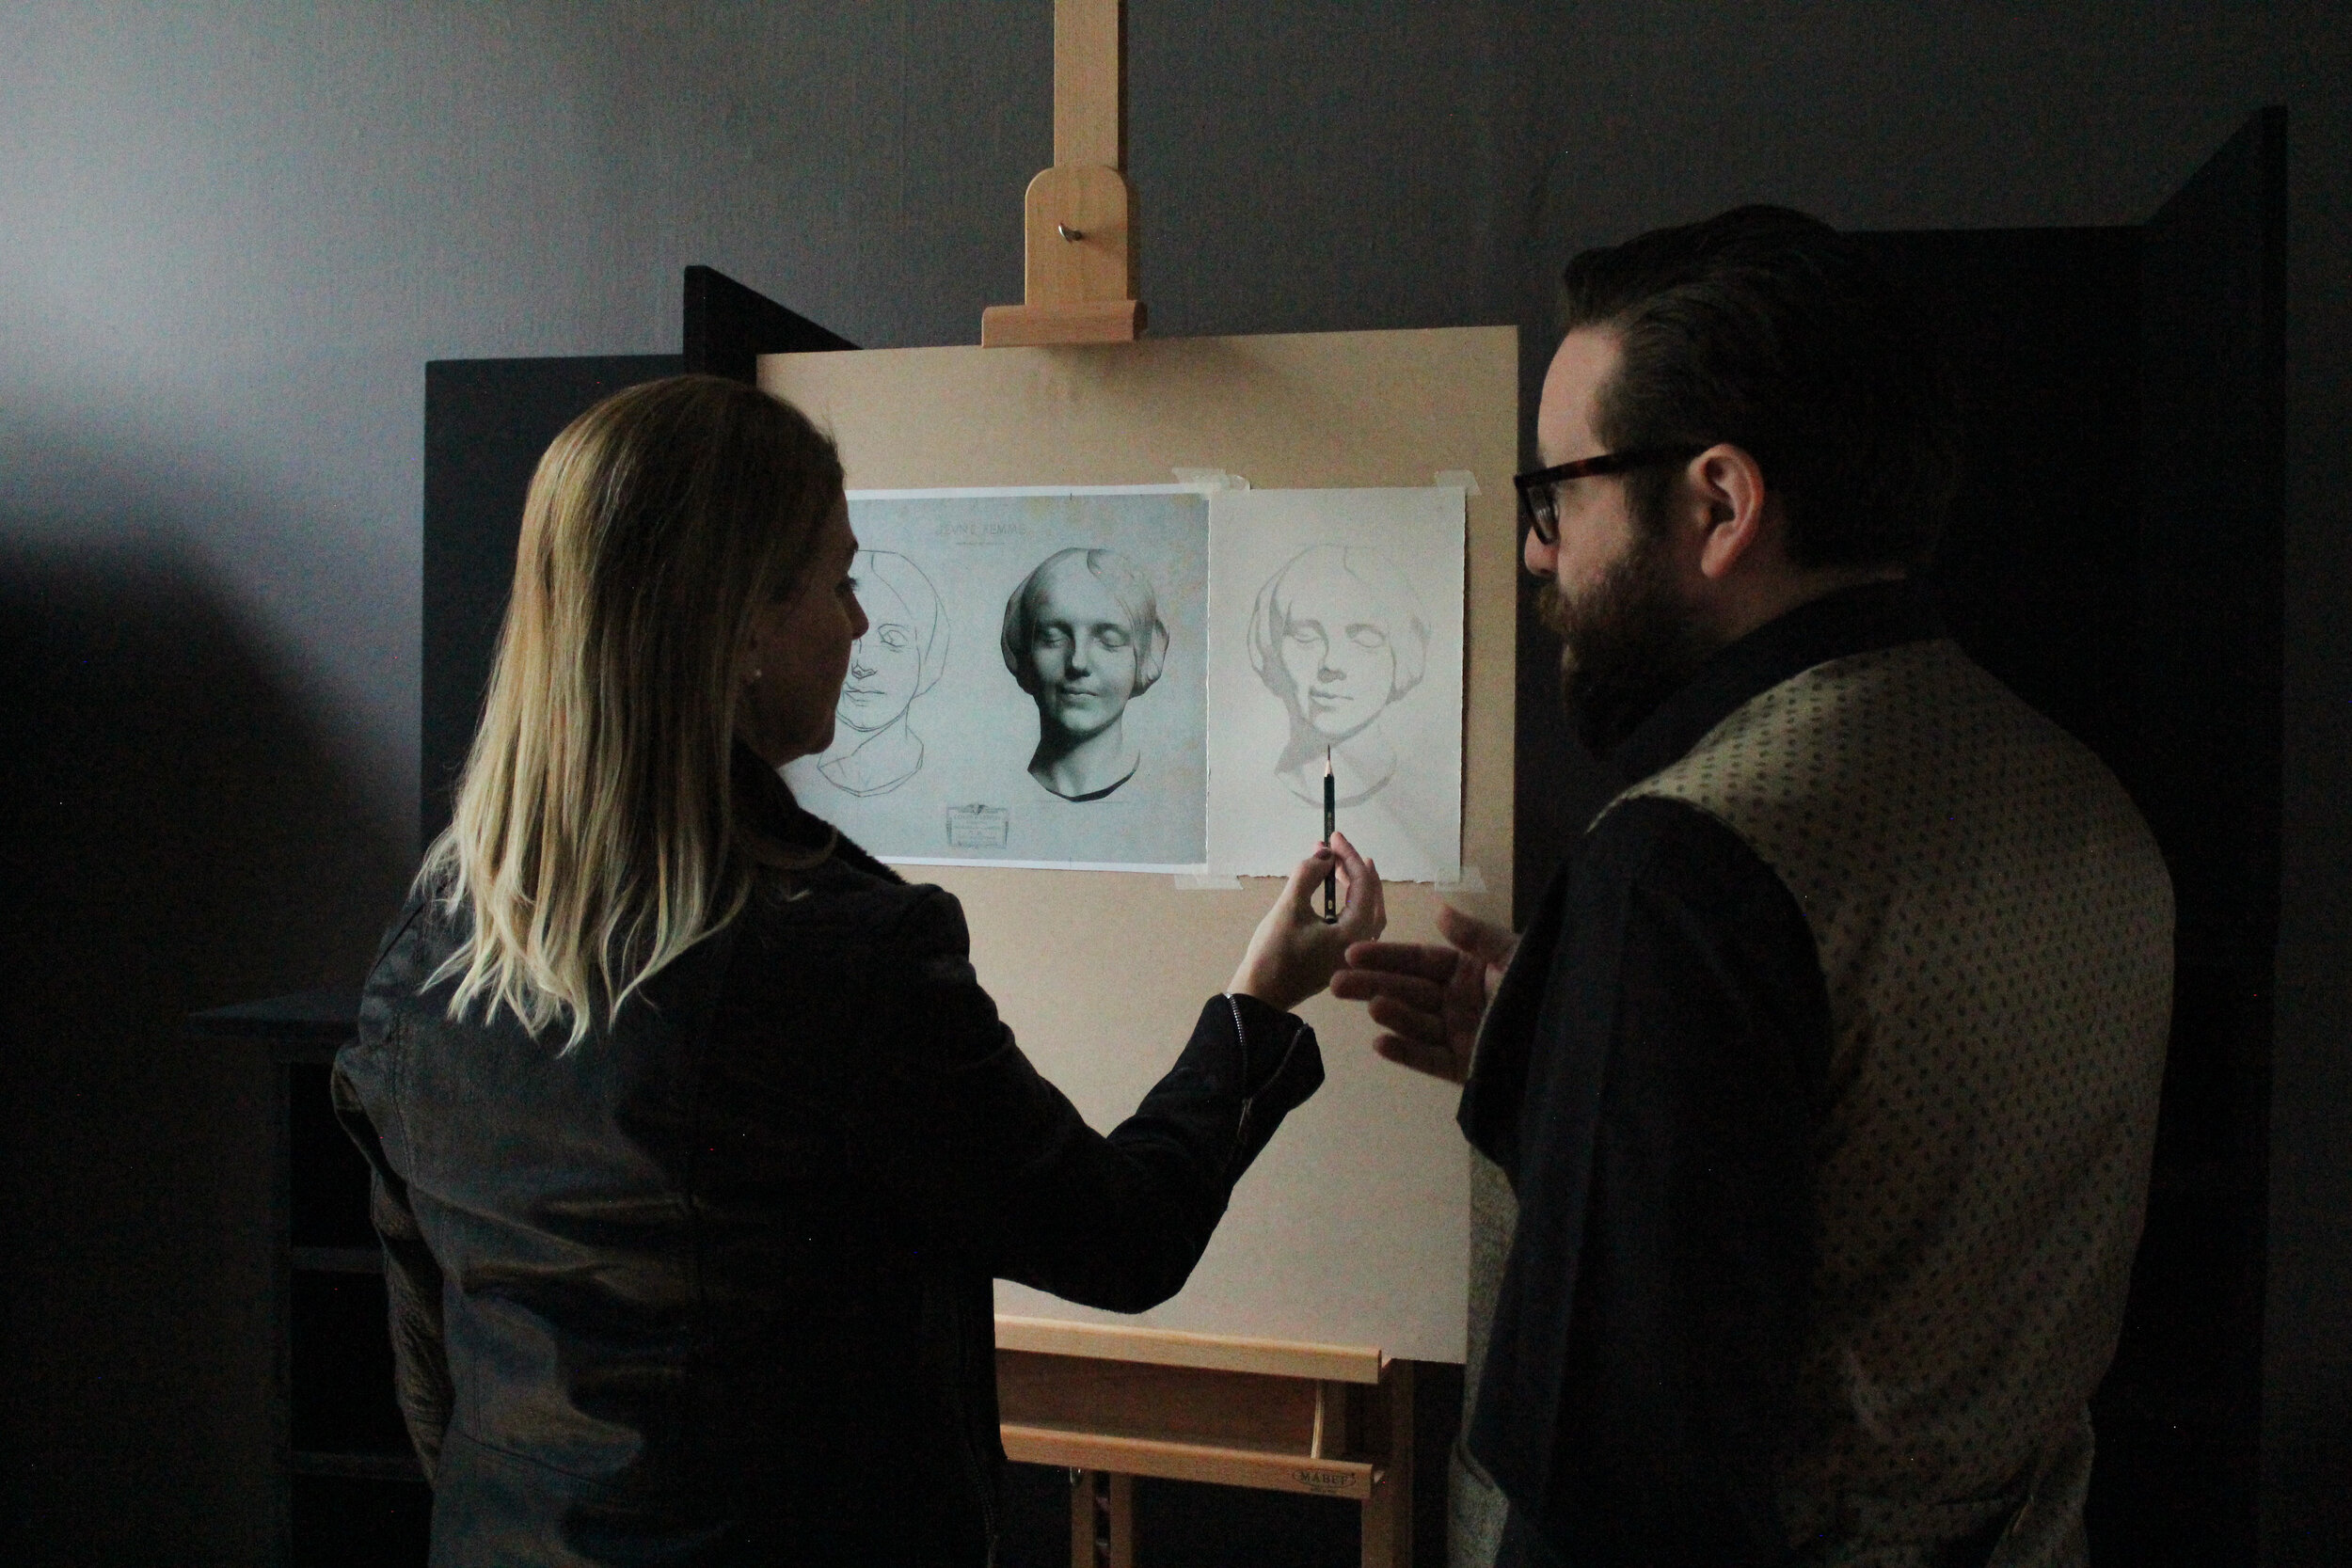  Teaching traditional methods of   REPRESENTATIONAL DRAWING AND PAINTING  